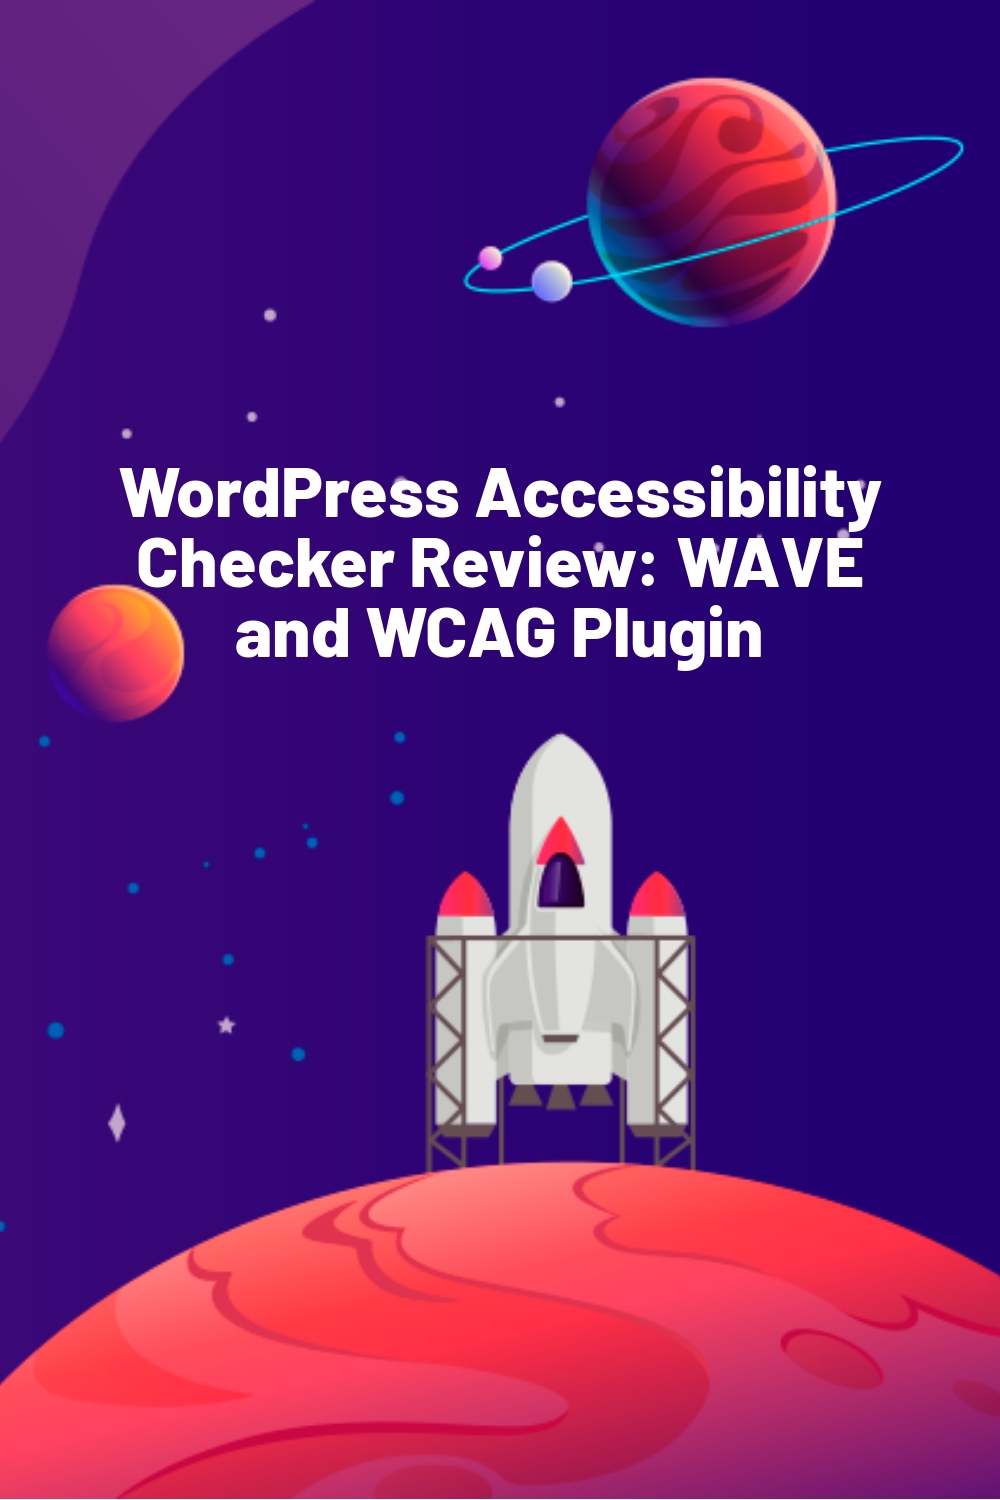 WordPress Accessibility Checker Review: WAVE and WCAG Plugin